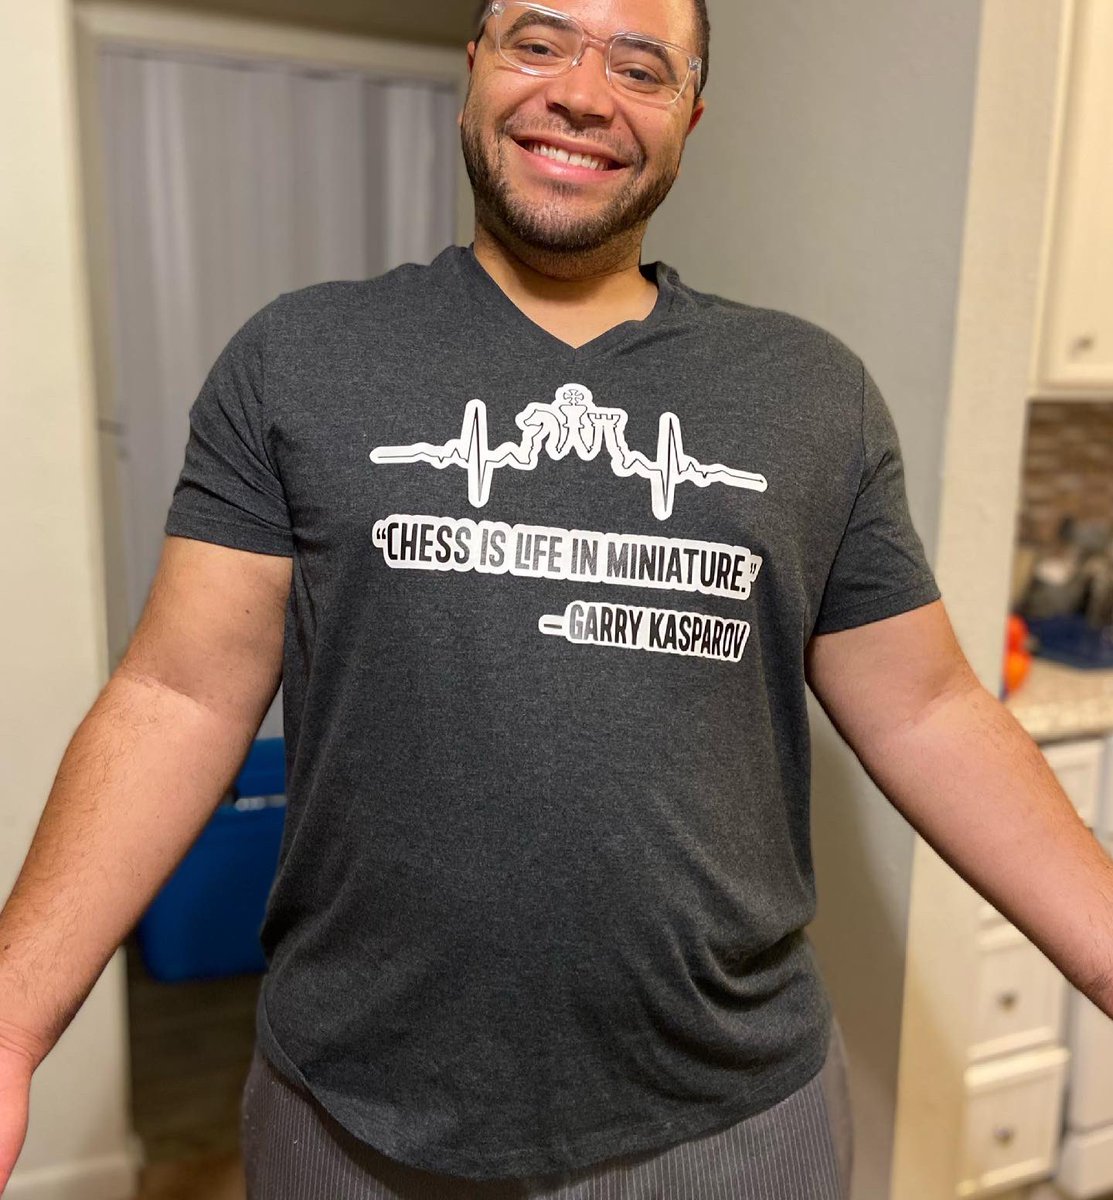 My wife @bmileslifestyle made me a chess shirt! ❤️ ❤️ ❤️!!!! Thank you! #chess #ajedrez #echecs #nola #TShirt #Quote #ChessQuotes #ChessNotCheckers #Moves #Smile #LifeIsGood #ChessLife @realchesscoach @CalculatedChess @gmcanty @HarlemKnite